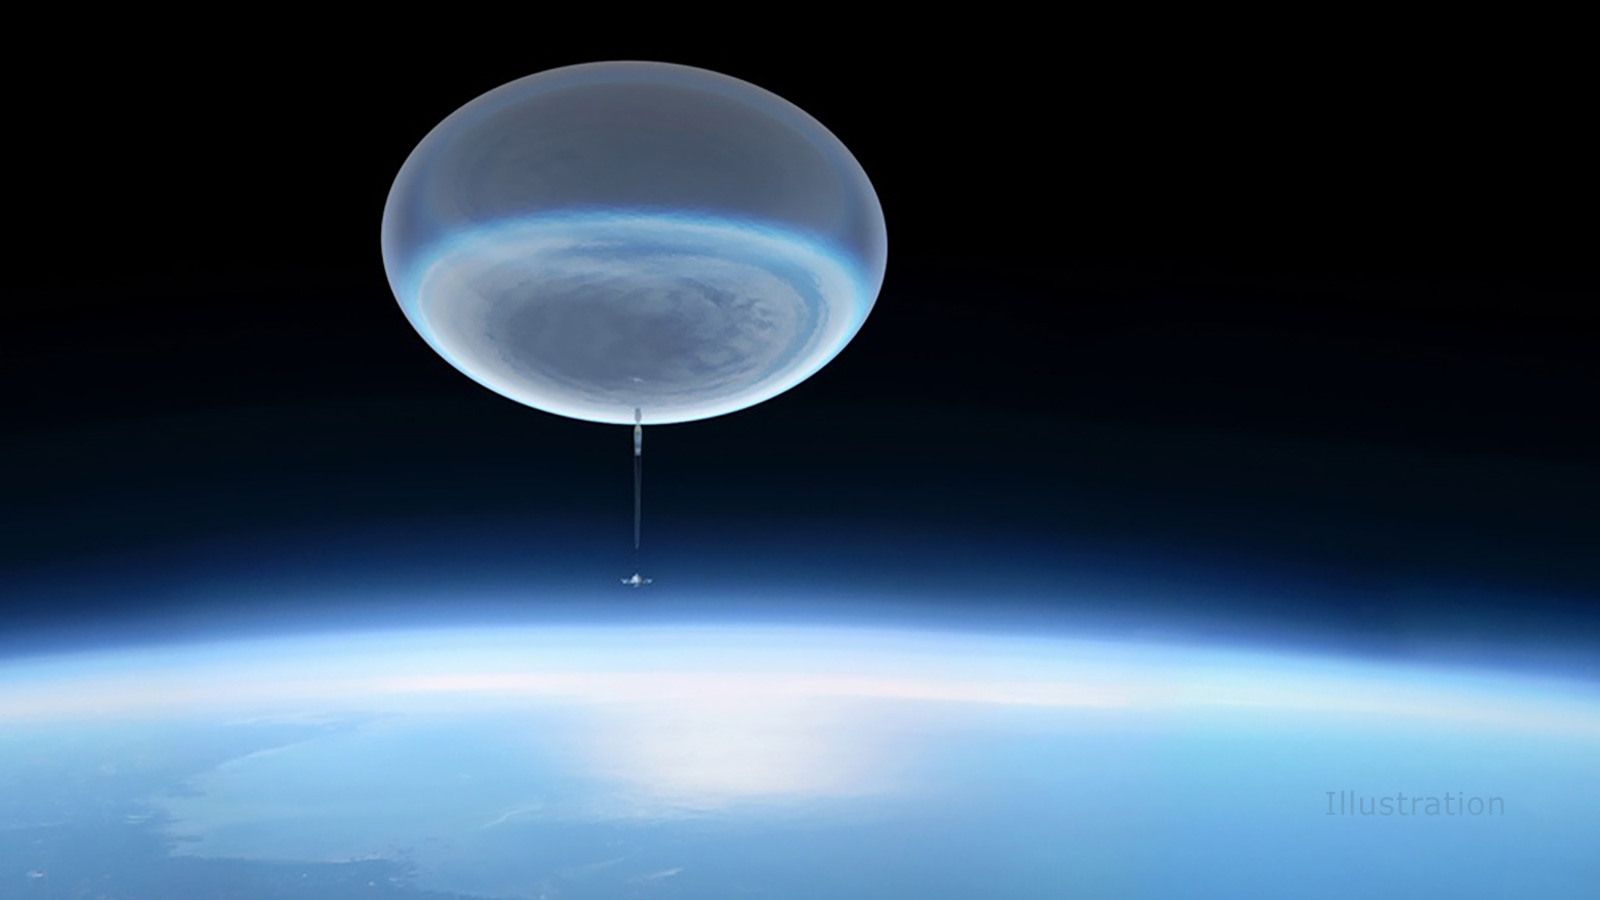 This illustration shows a high-altitude balloon ascending into the upper atmosphere.